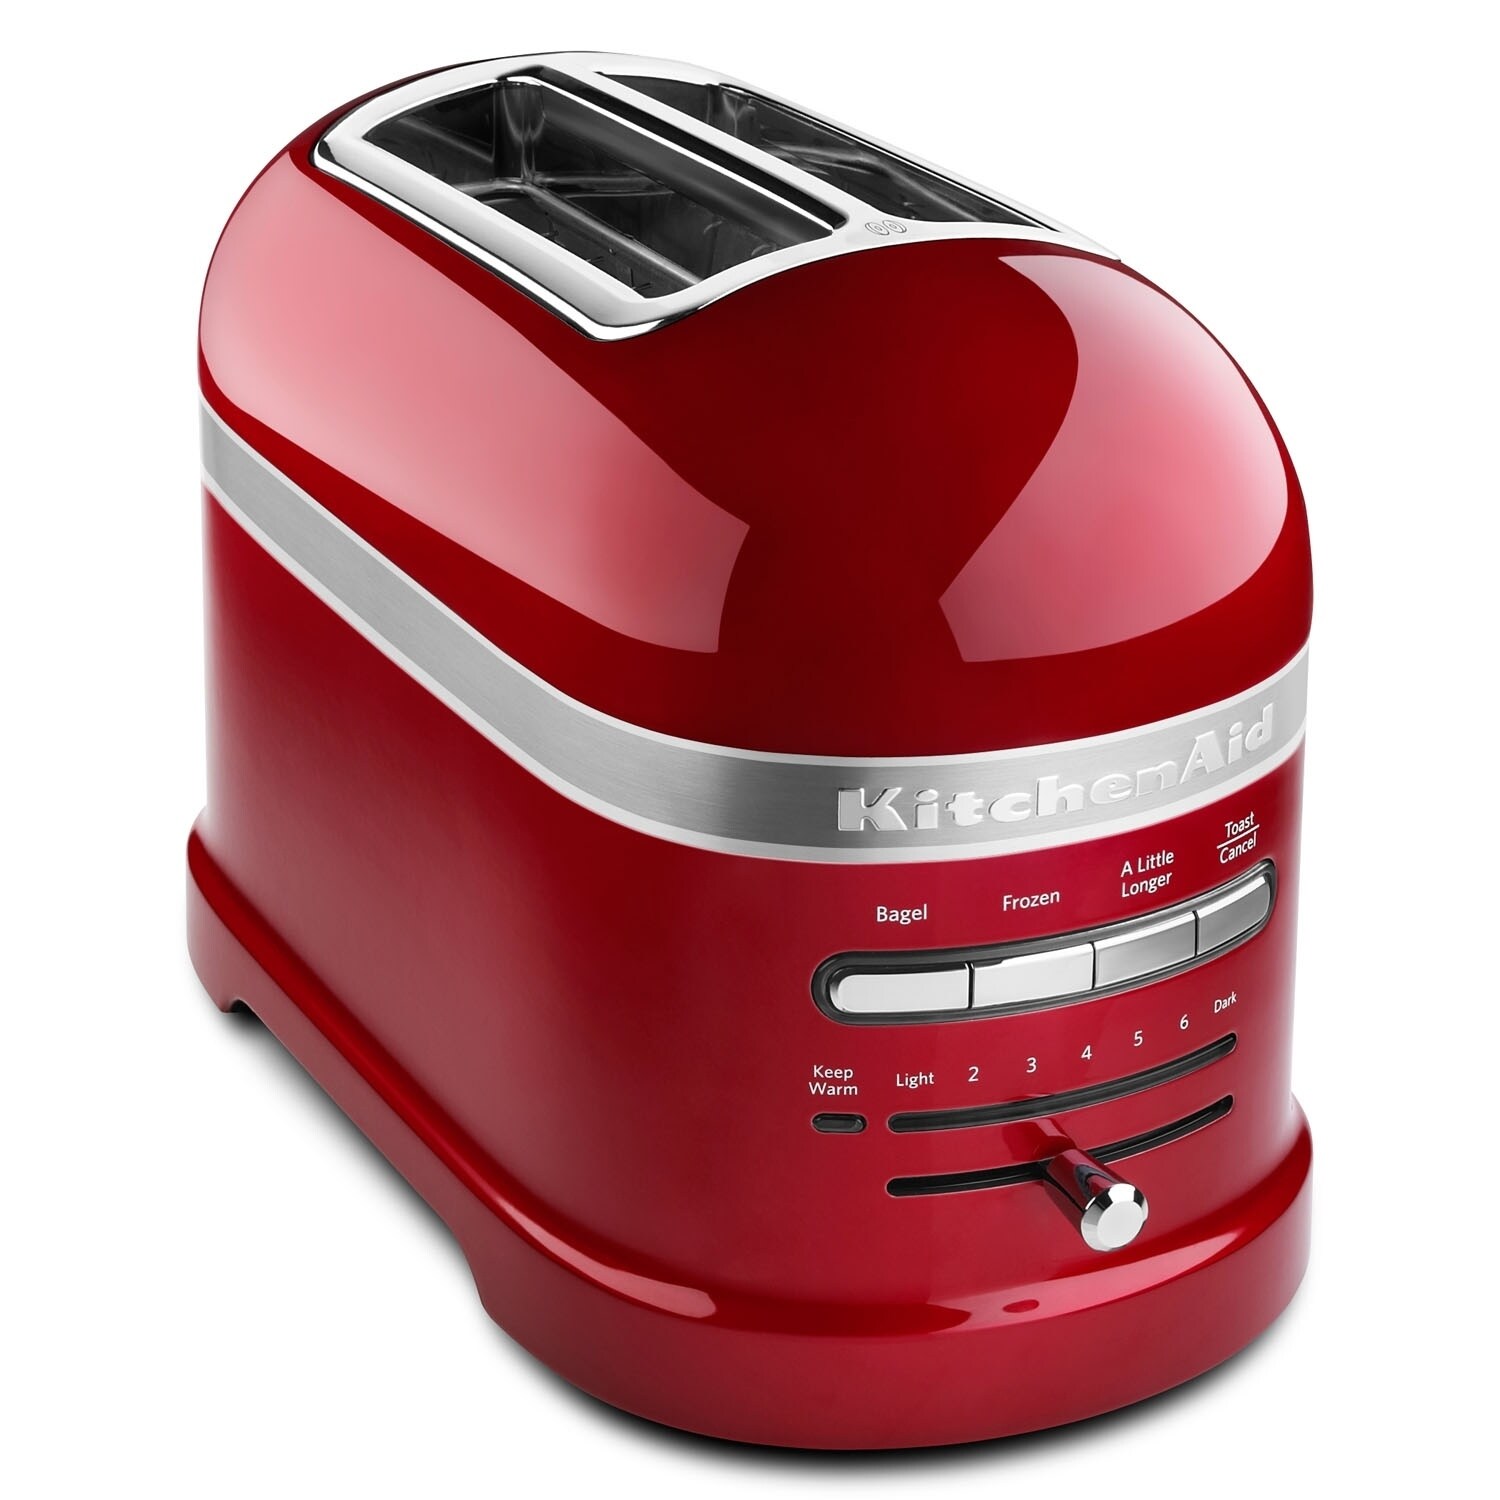 https://ak1.ostkcdn.com/images/products/24224222/KitchenAid-Pro-Line-2-Slice-Automatic-Toaster-in-Candy-Apple-Red-b2f41ba9-9bf5-4e91-b4b0-fa98de023e23.jpg